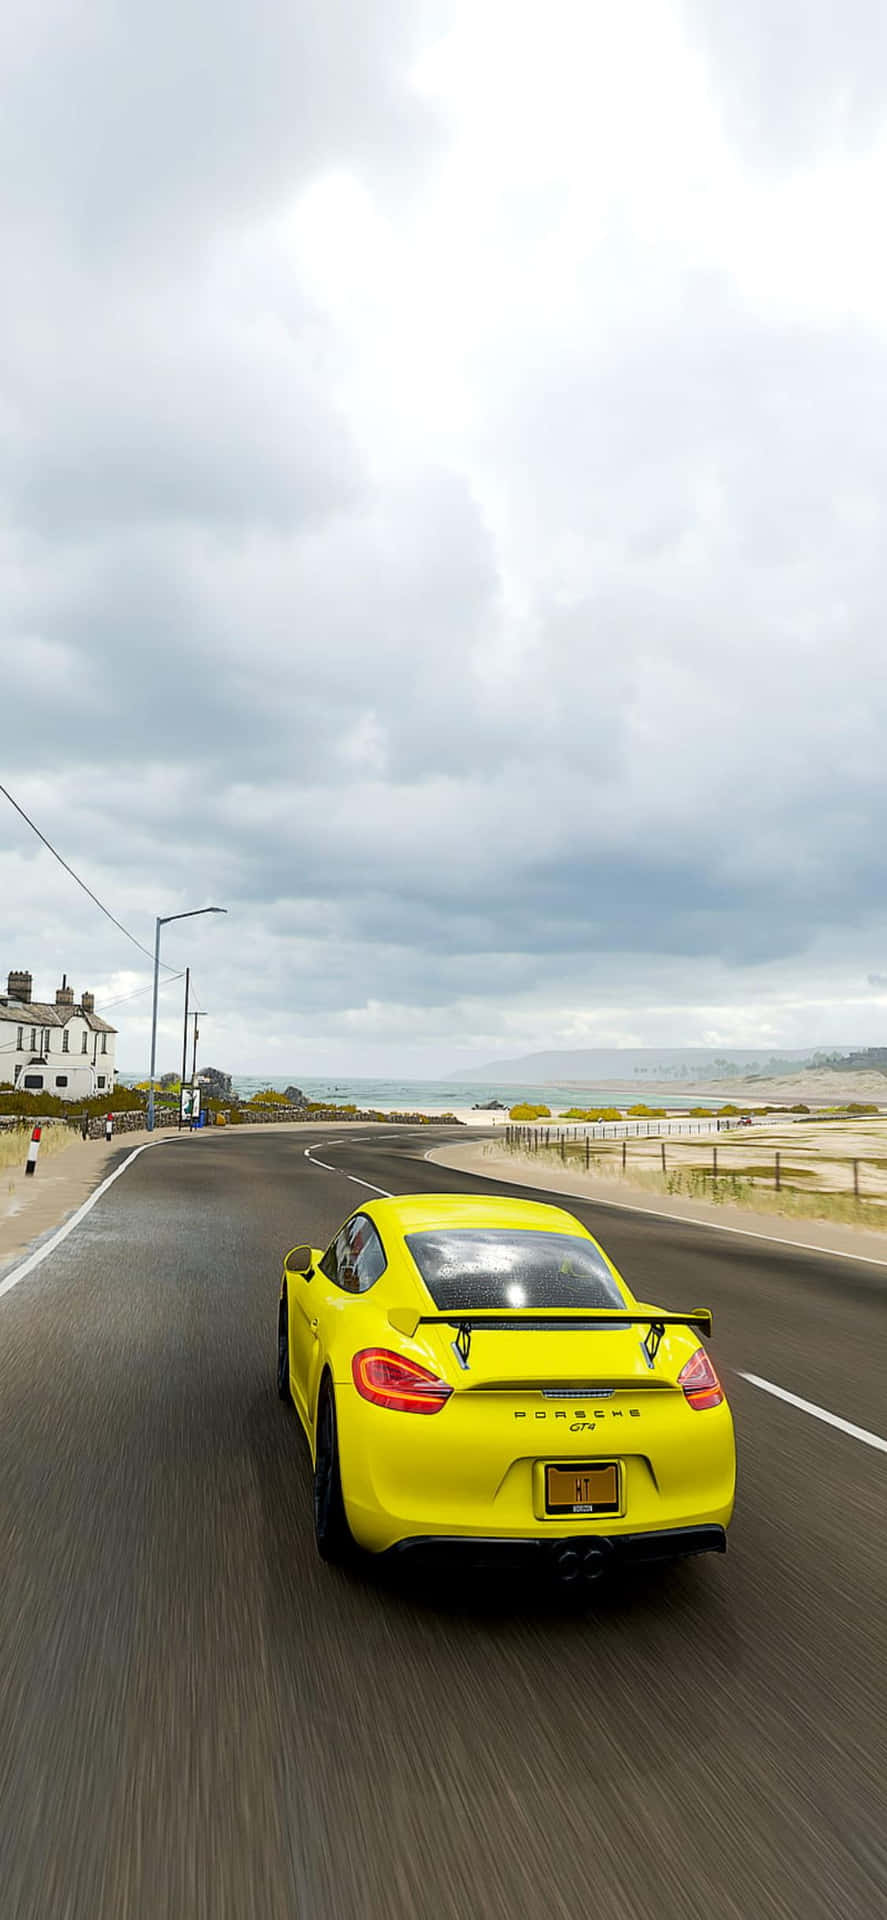 Experience the racing game like never before with the Iphone Xs and Forza Horizon 4